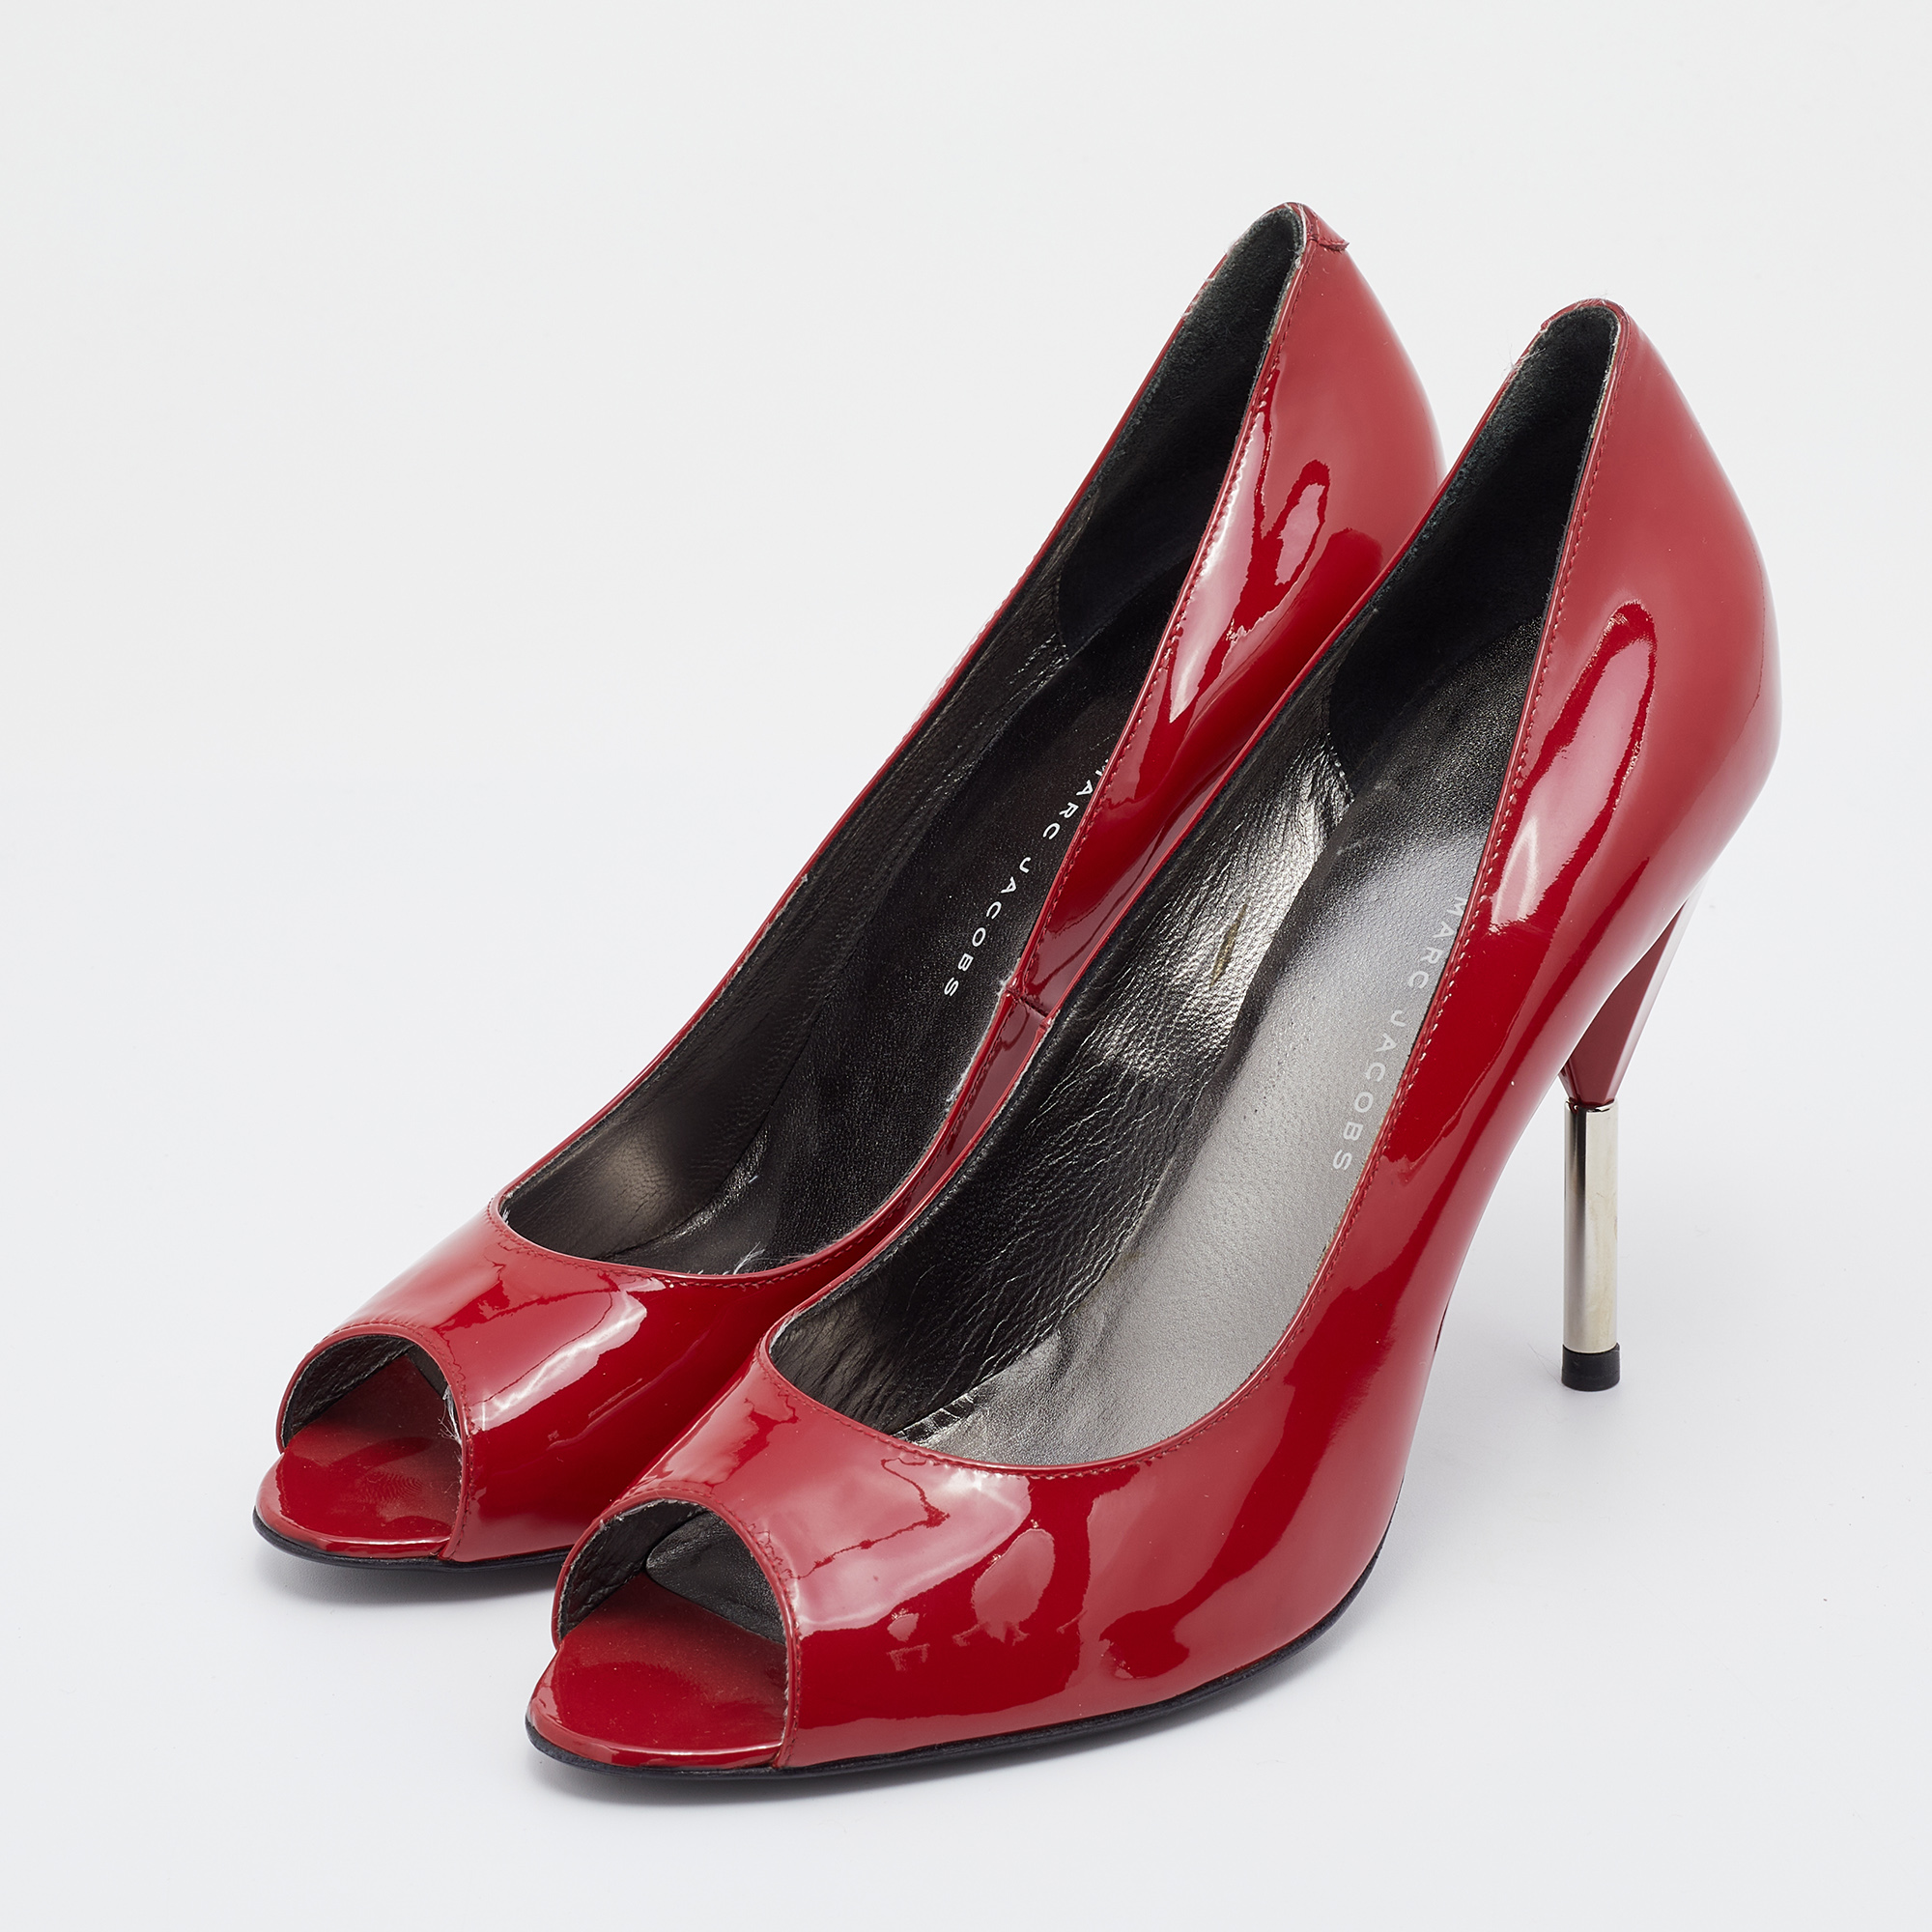 

Marc by Marc Jacobs Red Patent Leather Peep Toe Pumps Size